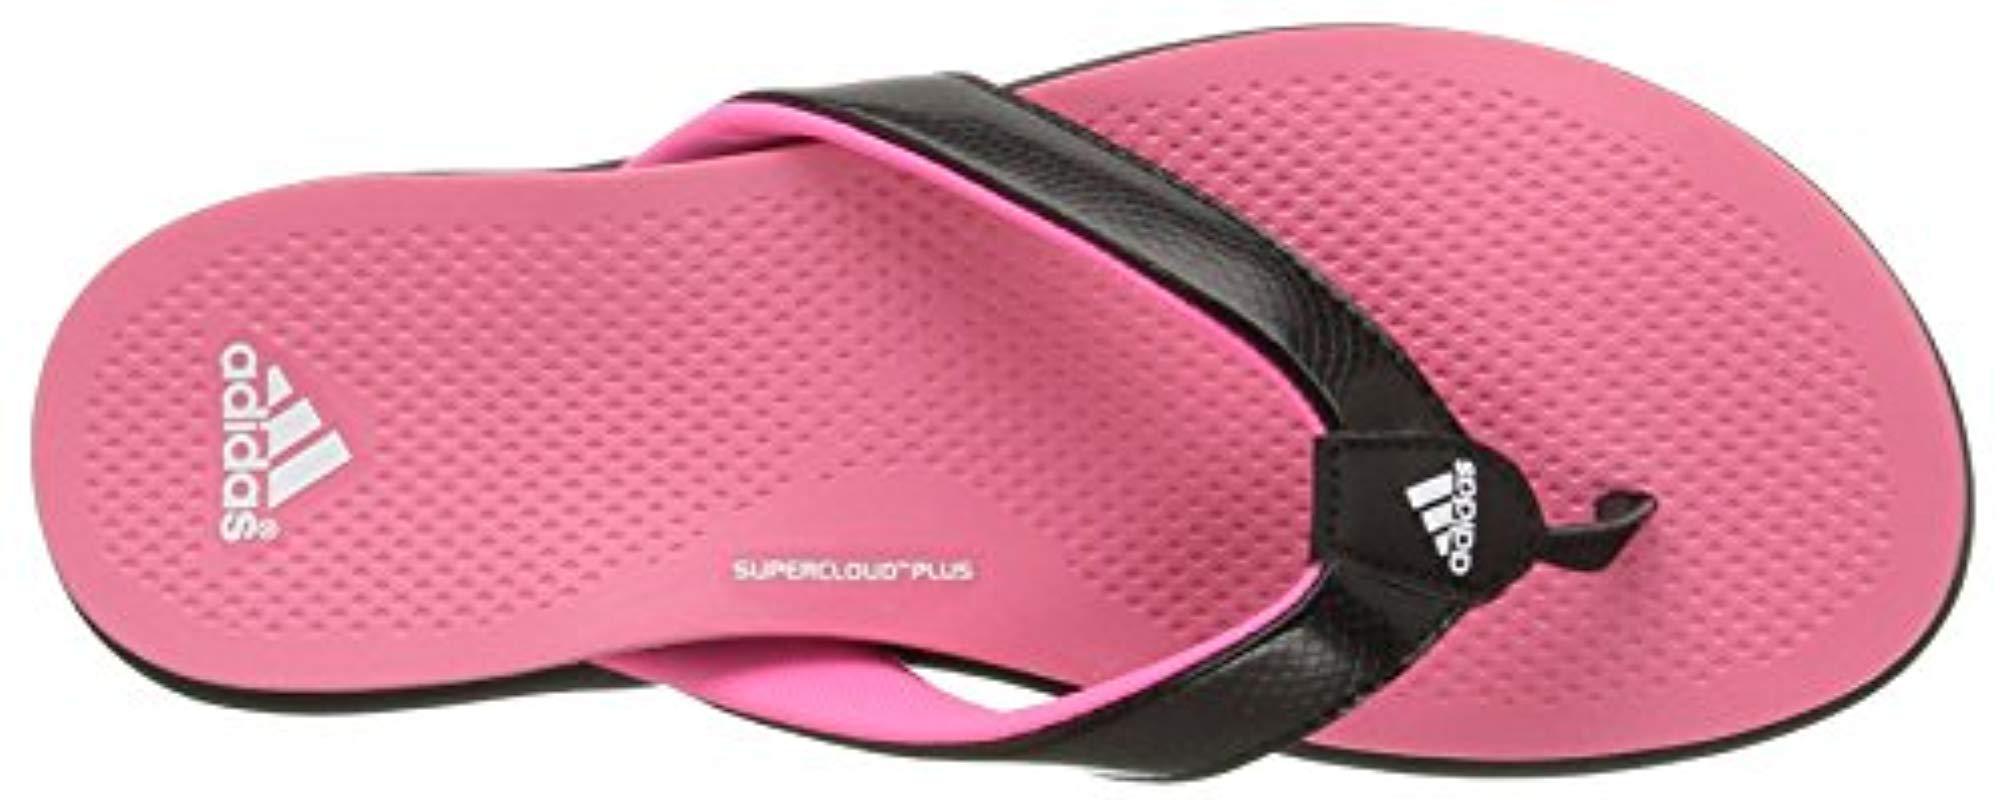 adidas Supercloud Plus Thong Athletic Running Shoe in Pink - Lyst